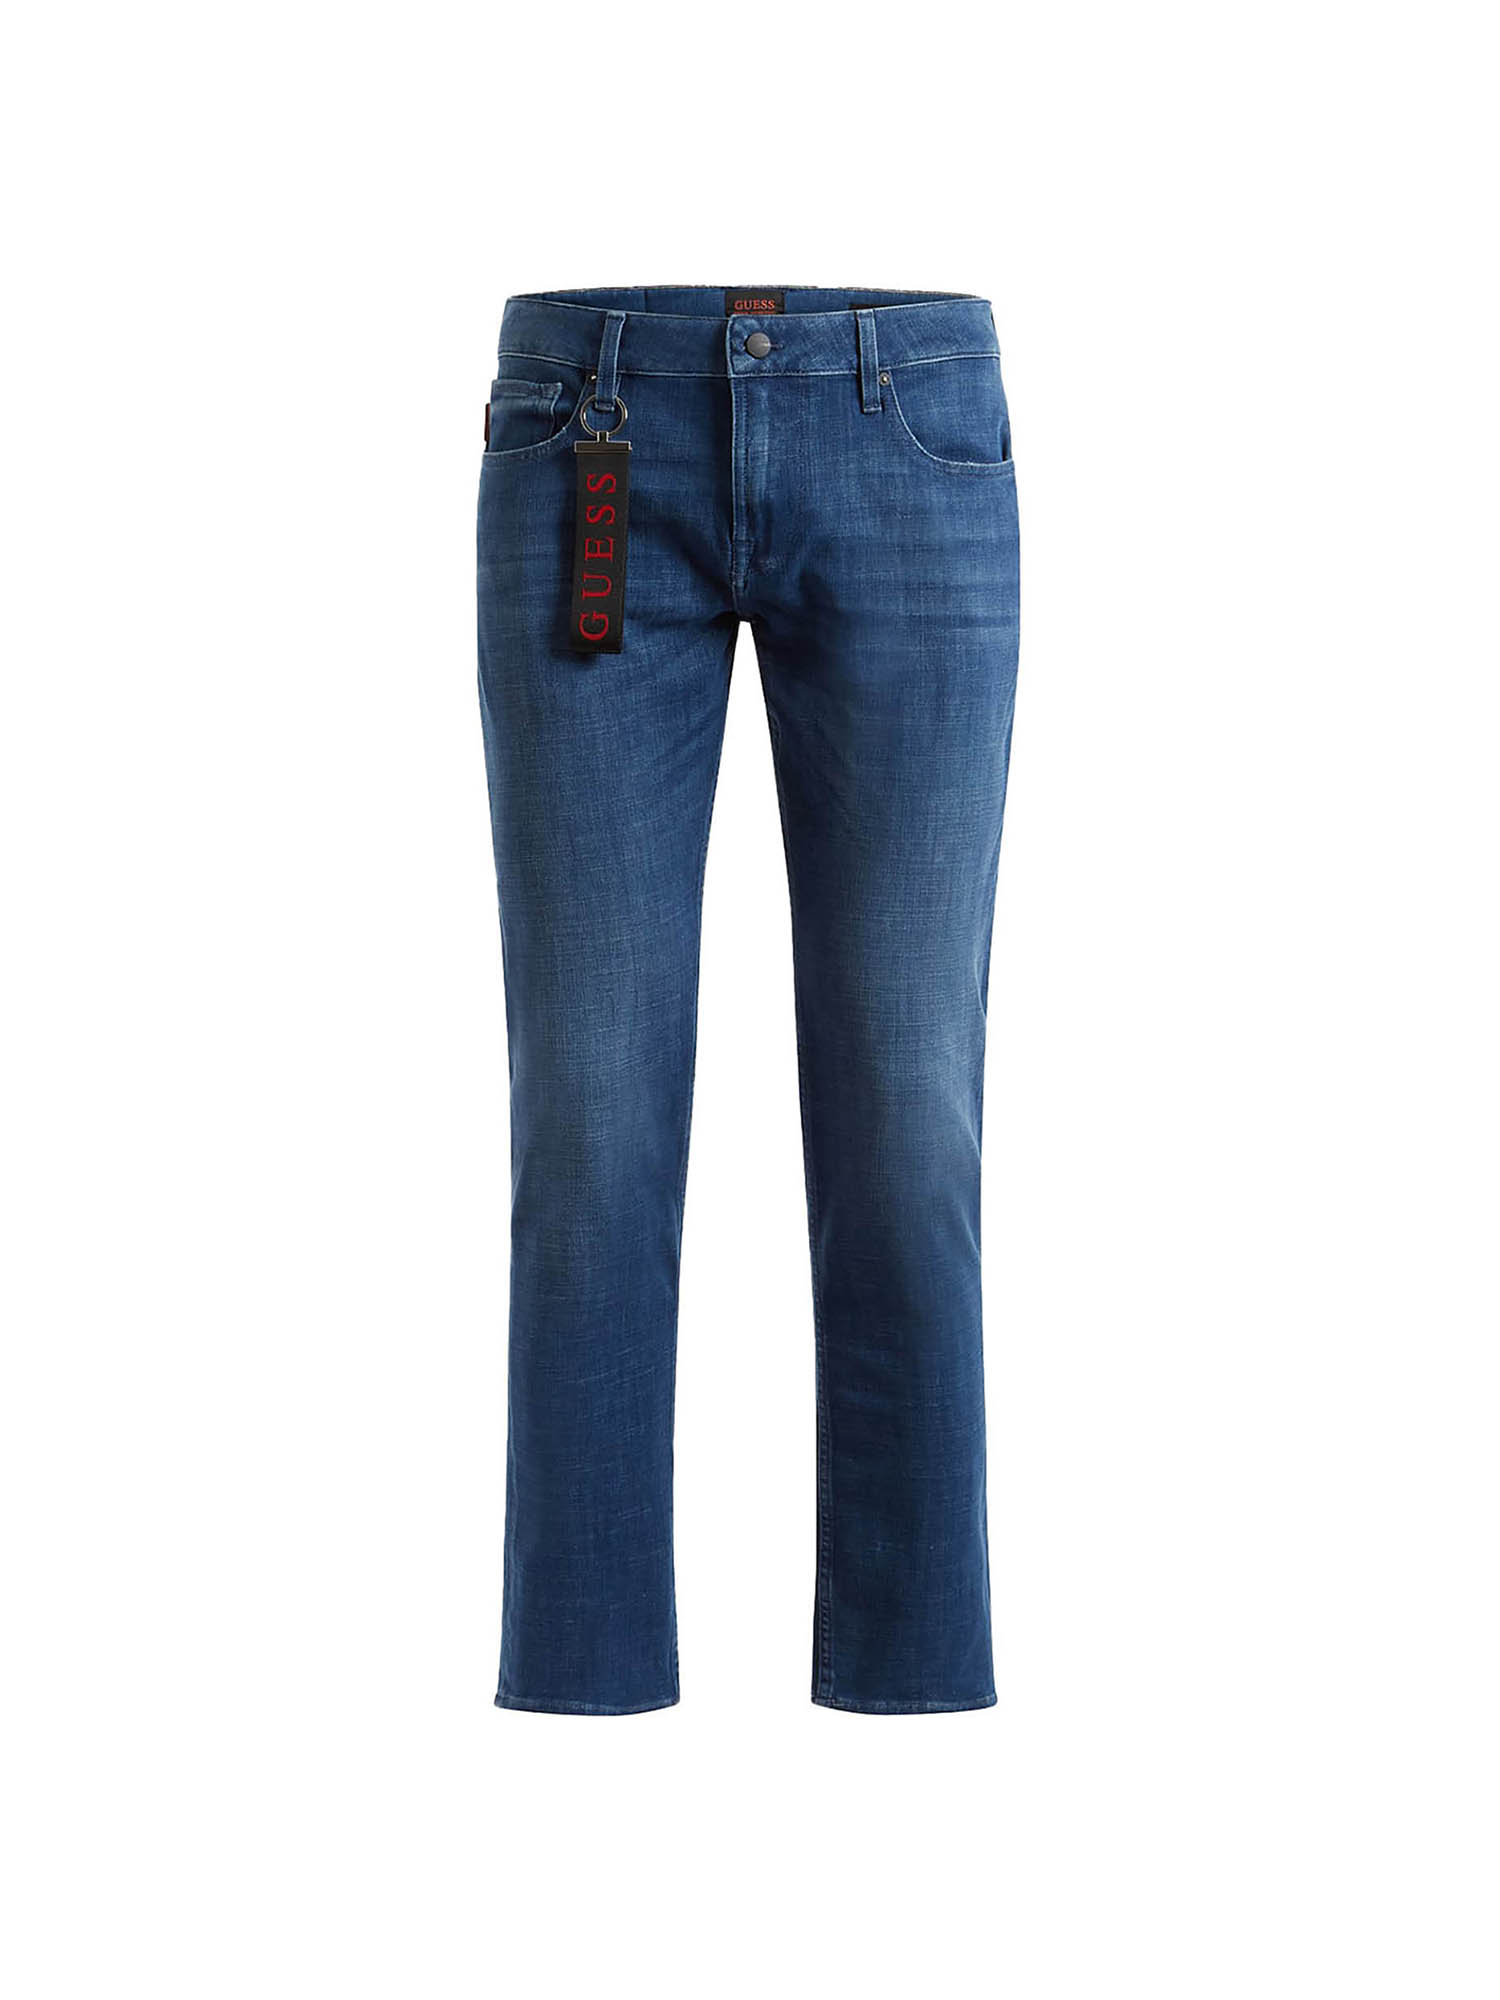 JEANS UOMO - GUESS JEANS - M2YAS2 D4PM1 - JEANS, 28